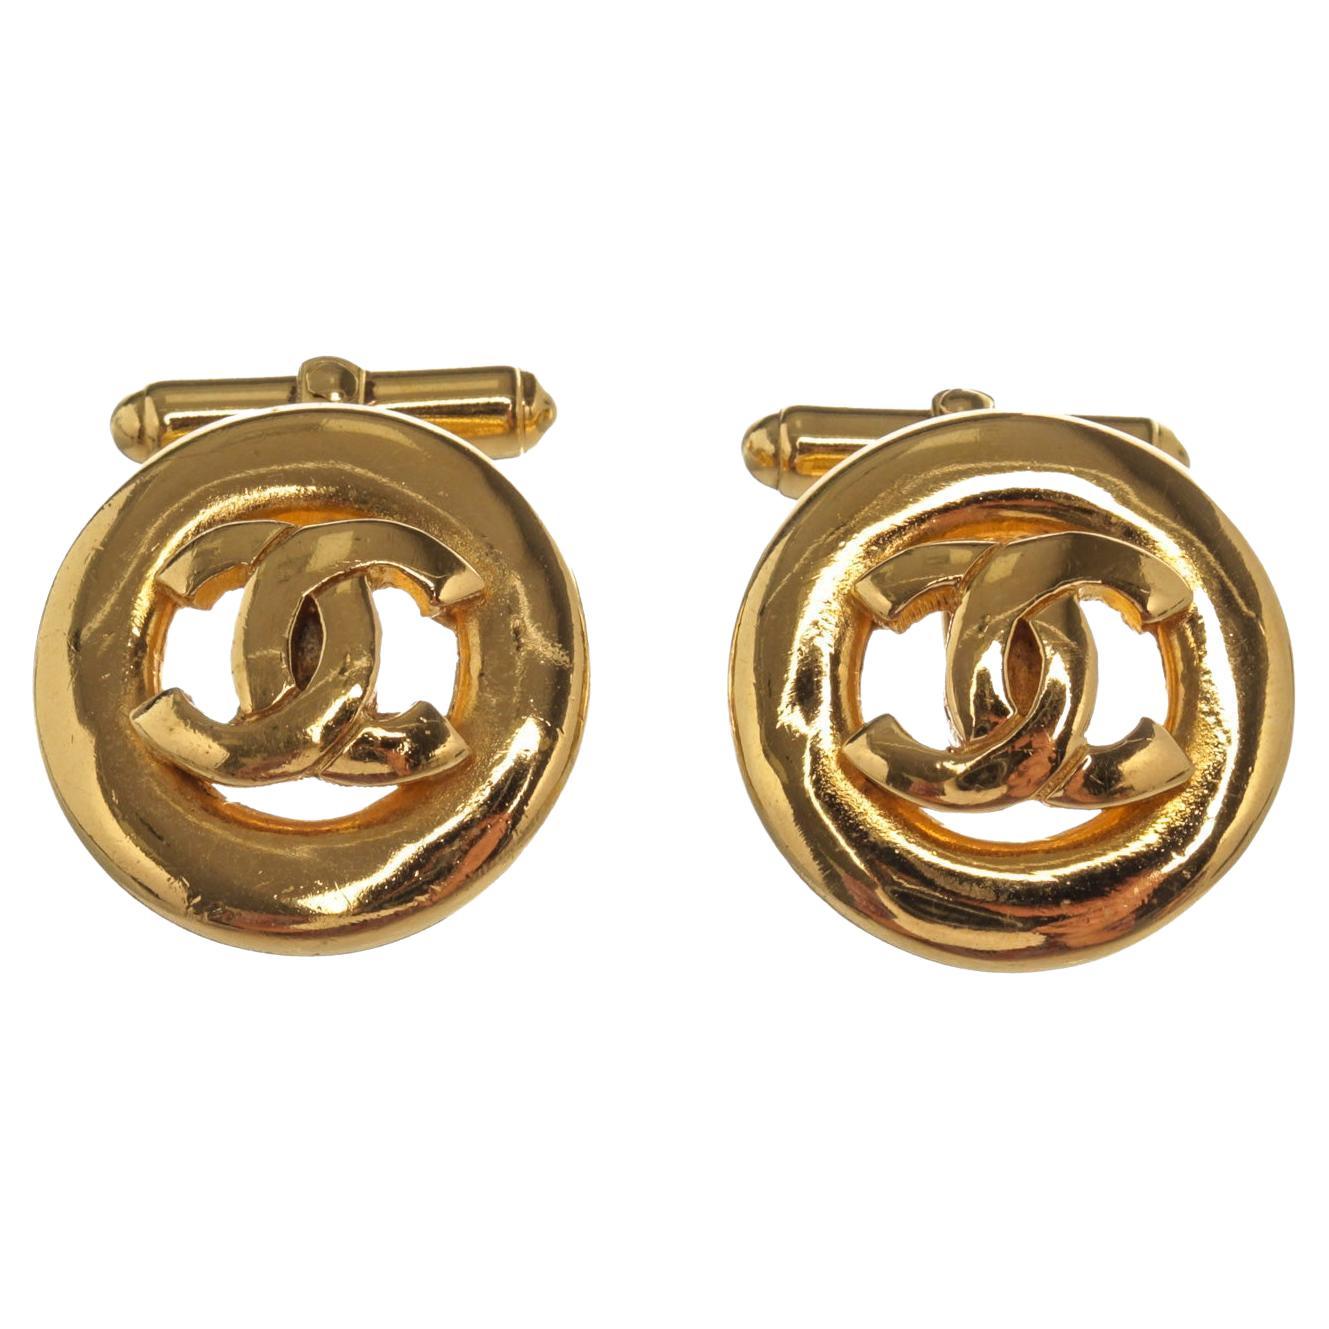 Gold-Tone and Round Chanel CC Cufflinks with Iconic Chanel Logo in the Center 